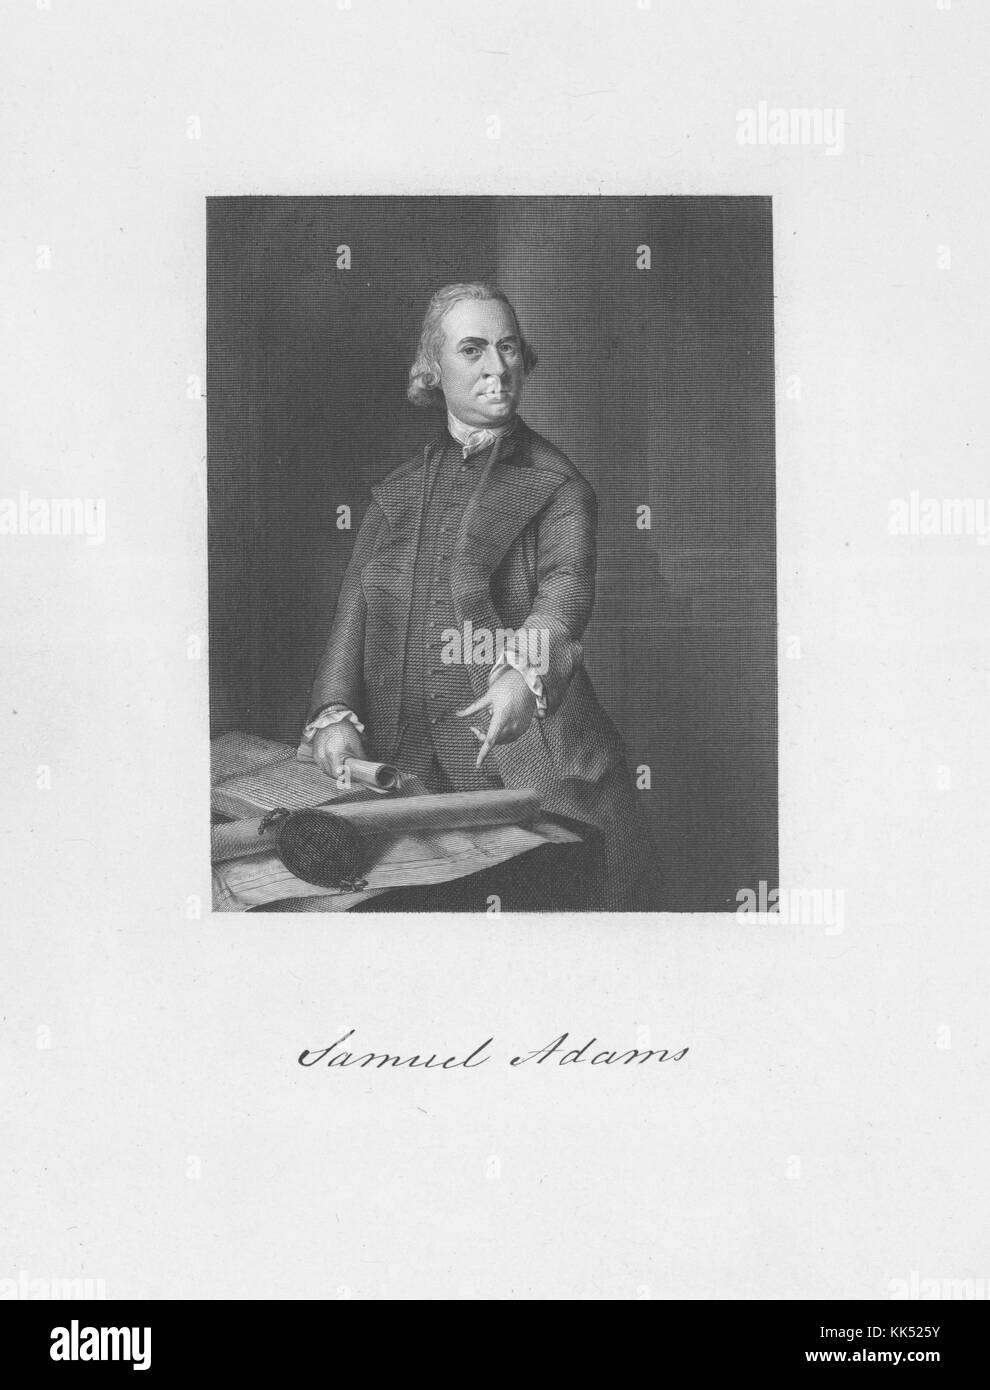 Engraved portrait of Samuel Adams, one of the Founding Fathers of the United States, as a politician in colonial Massachusetts, Adams was a leader of the movement that became the American Revolution, standing, pointing at writings on his desk, 1772. From the New York Public Library. Stock Photo